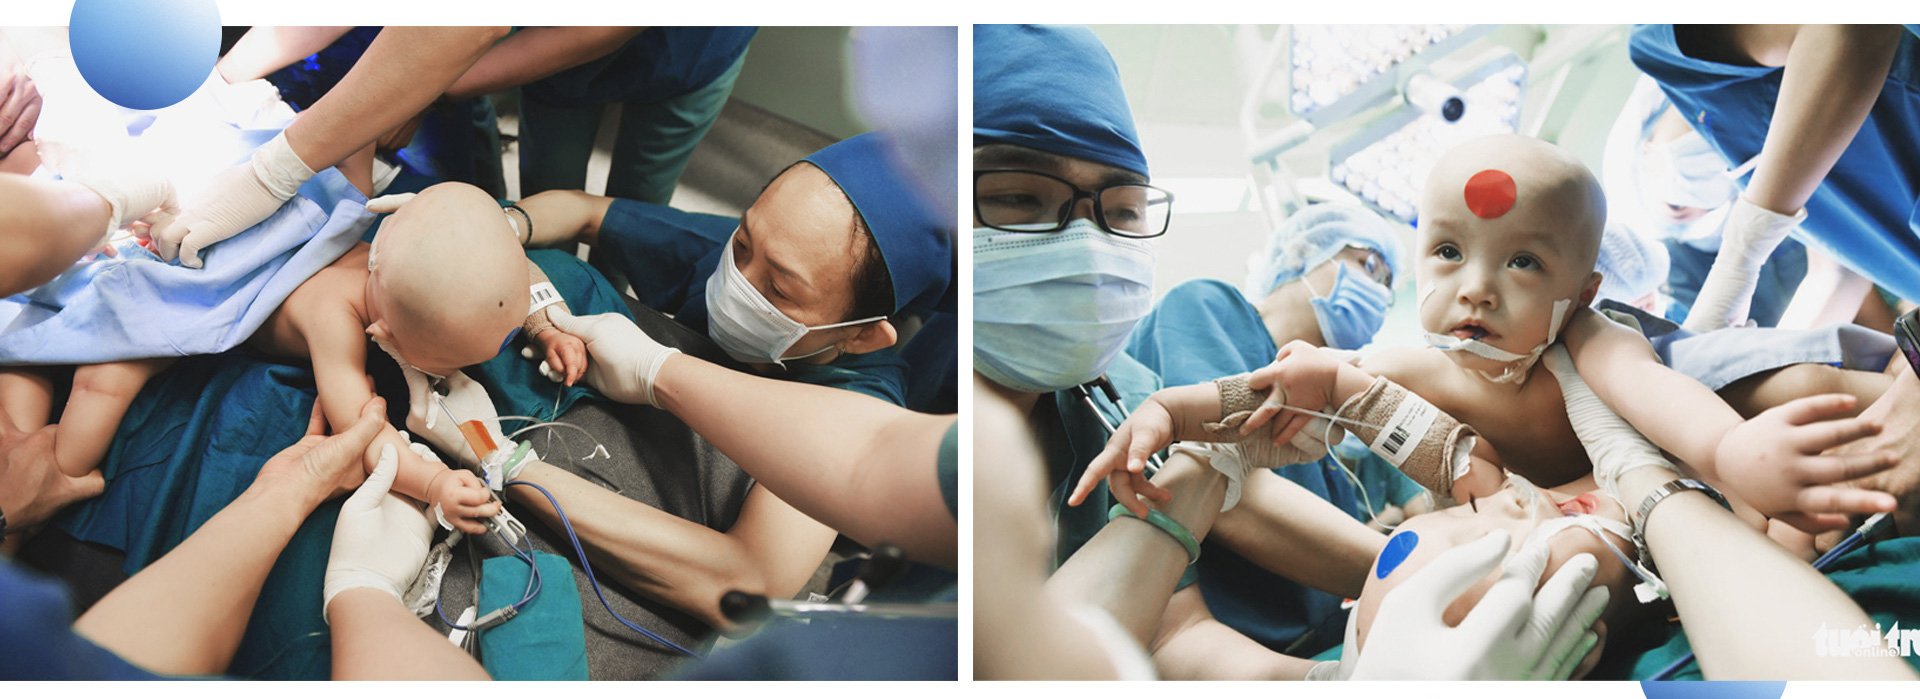 The conjoined twins are given anesthesia at HCM City Pediatrics Hospital.